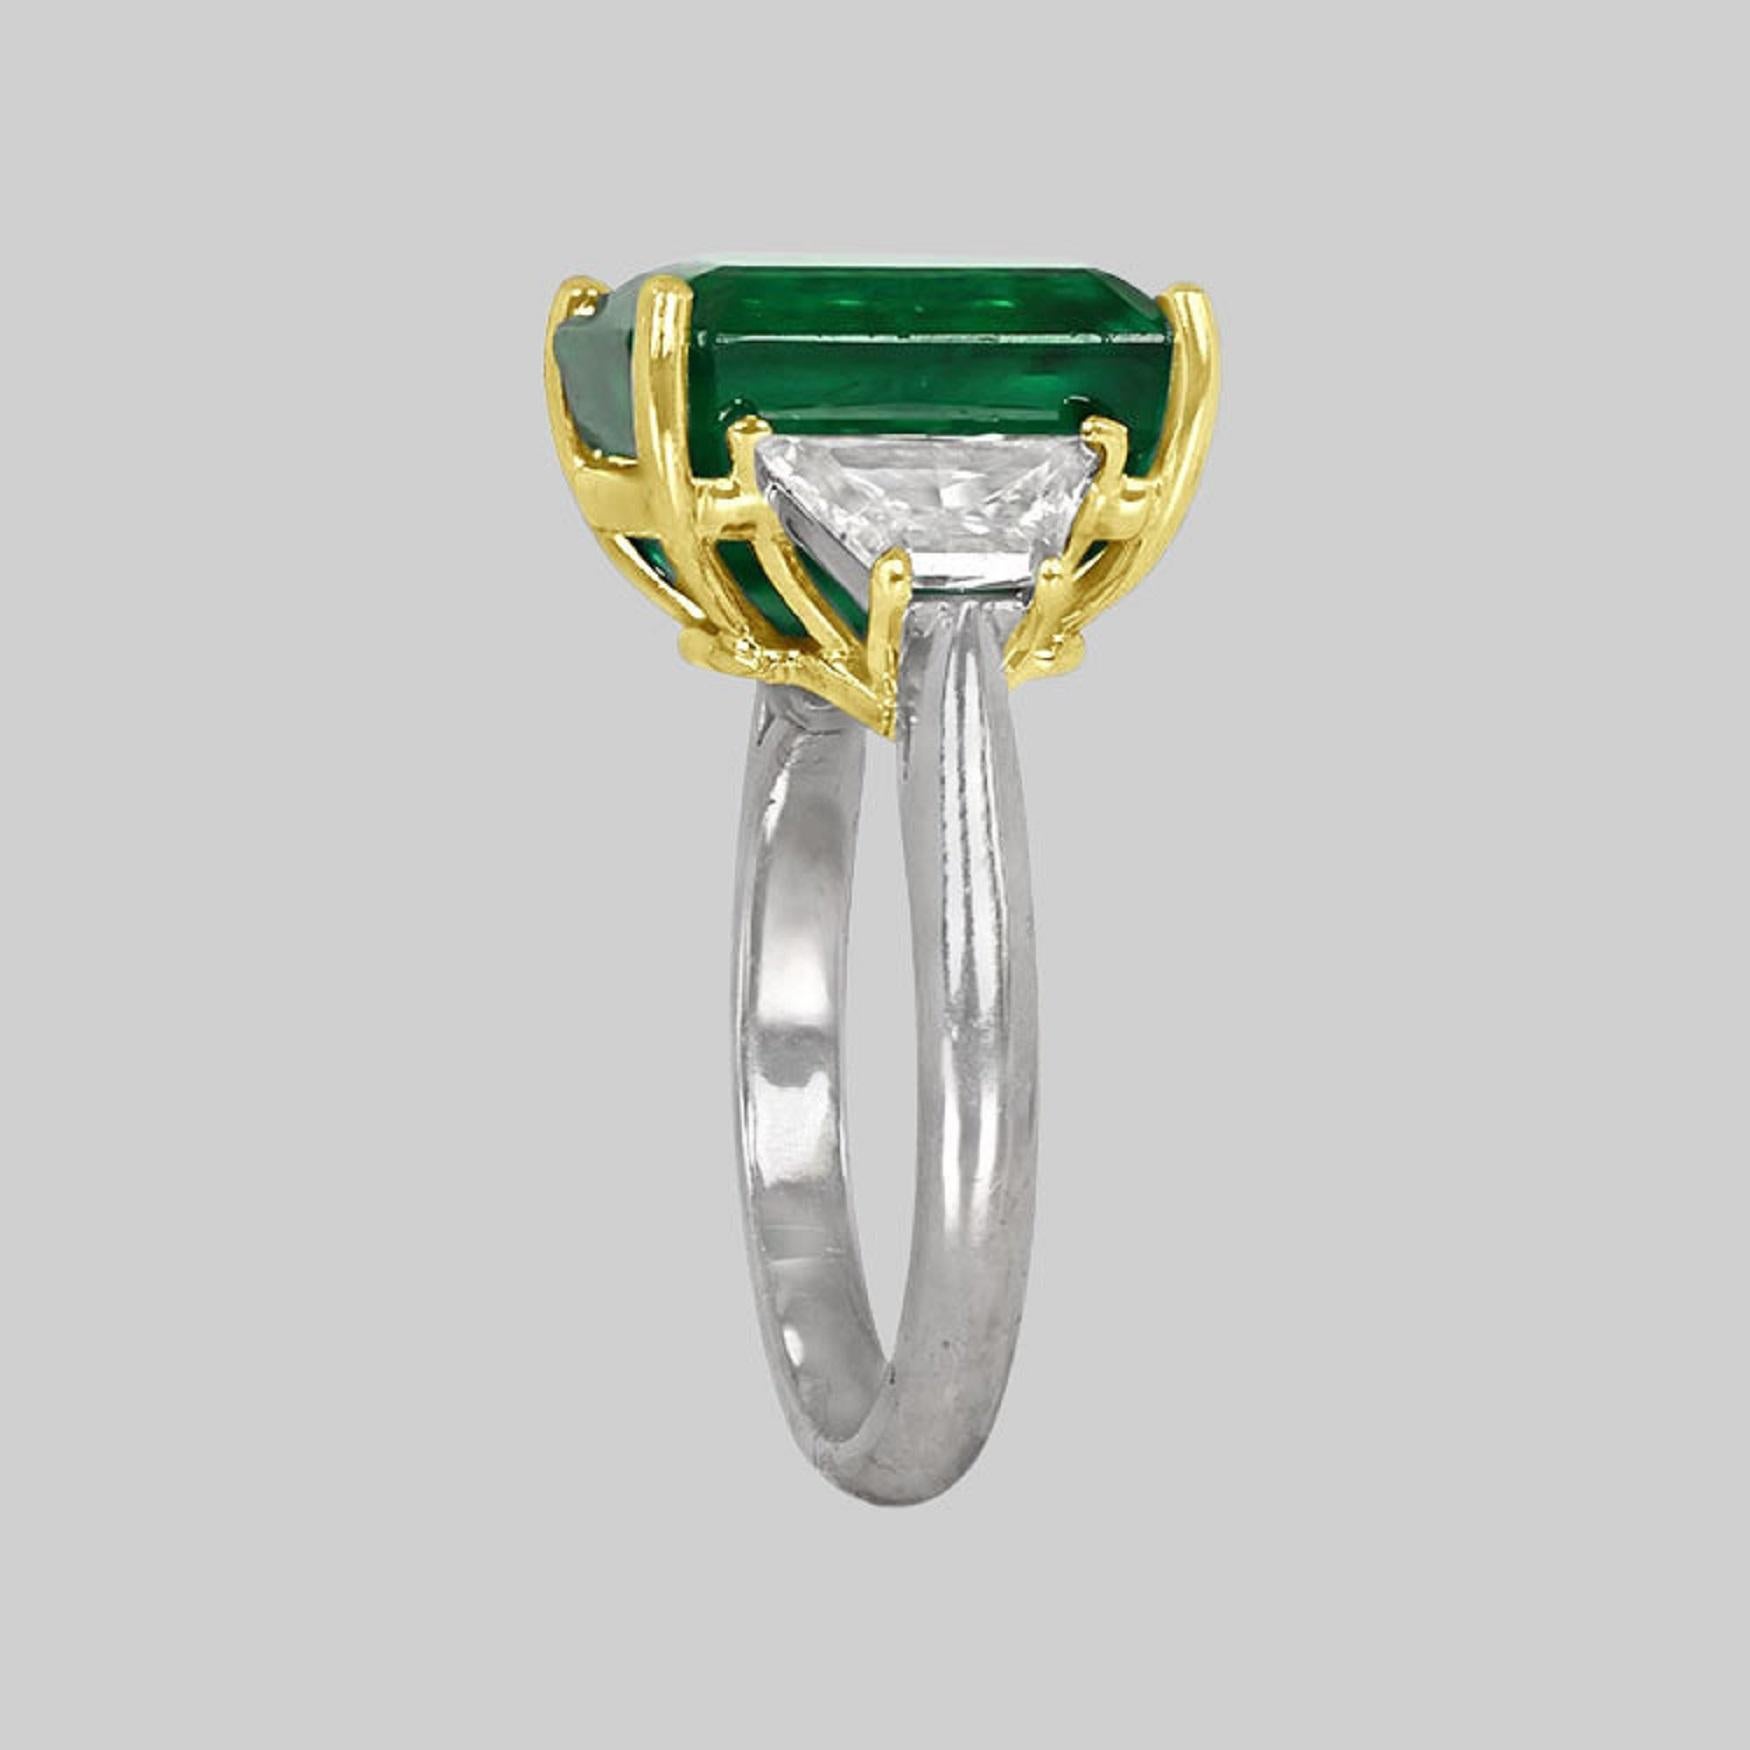 Emerald Cut GIA Certified 7 Carat Green Emerald Diamond Solitaire Ring Minor Oil For Sale